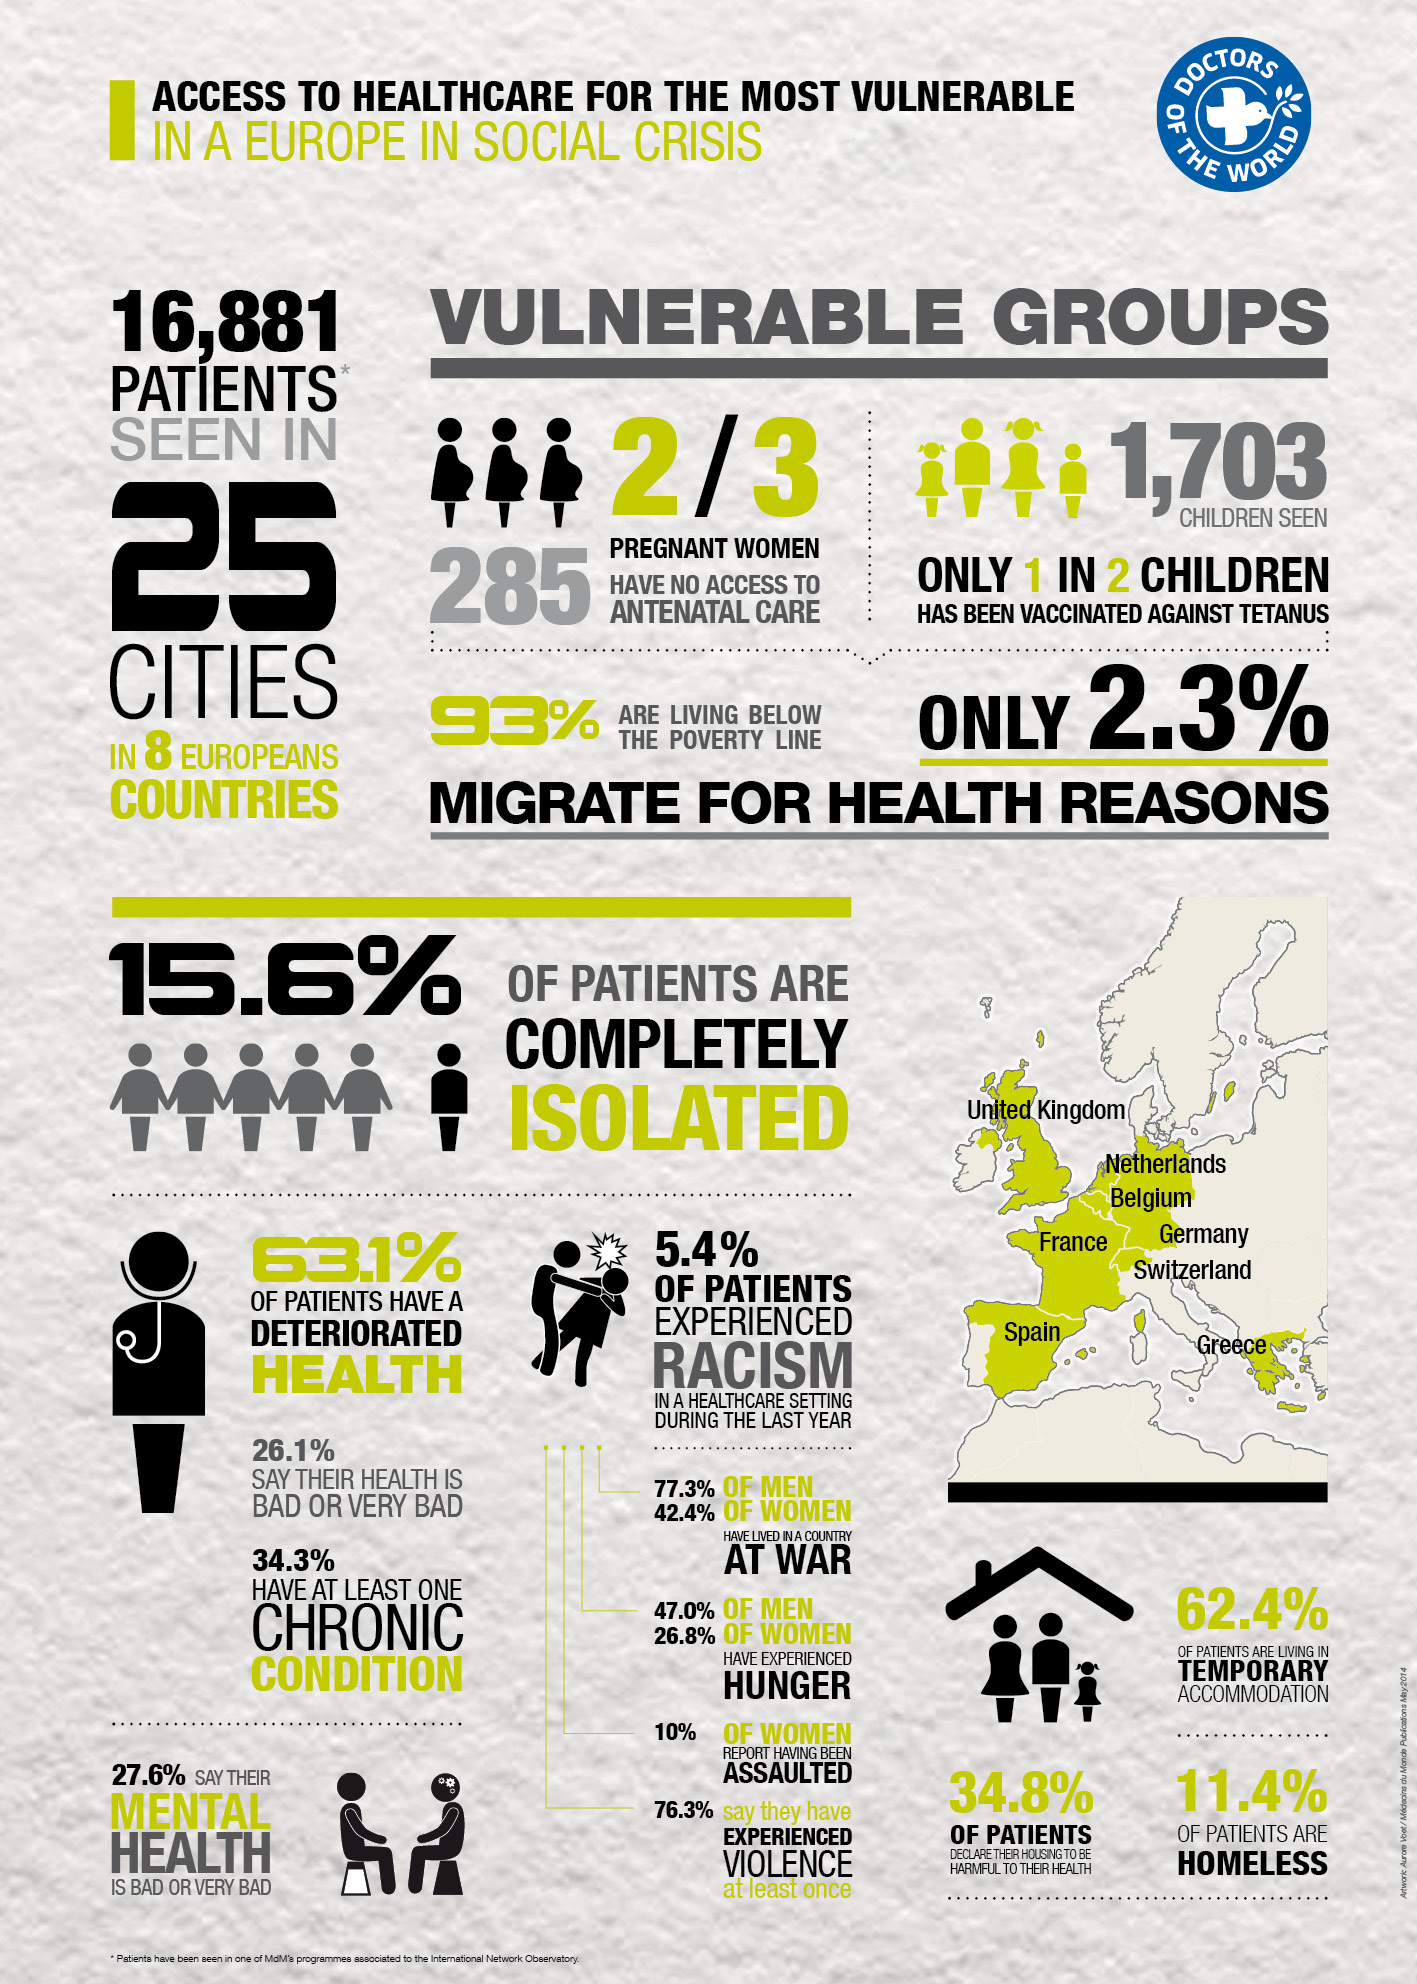 Access to healthcare for the most vulnerable in a Europe